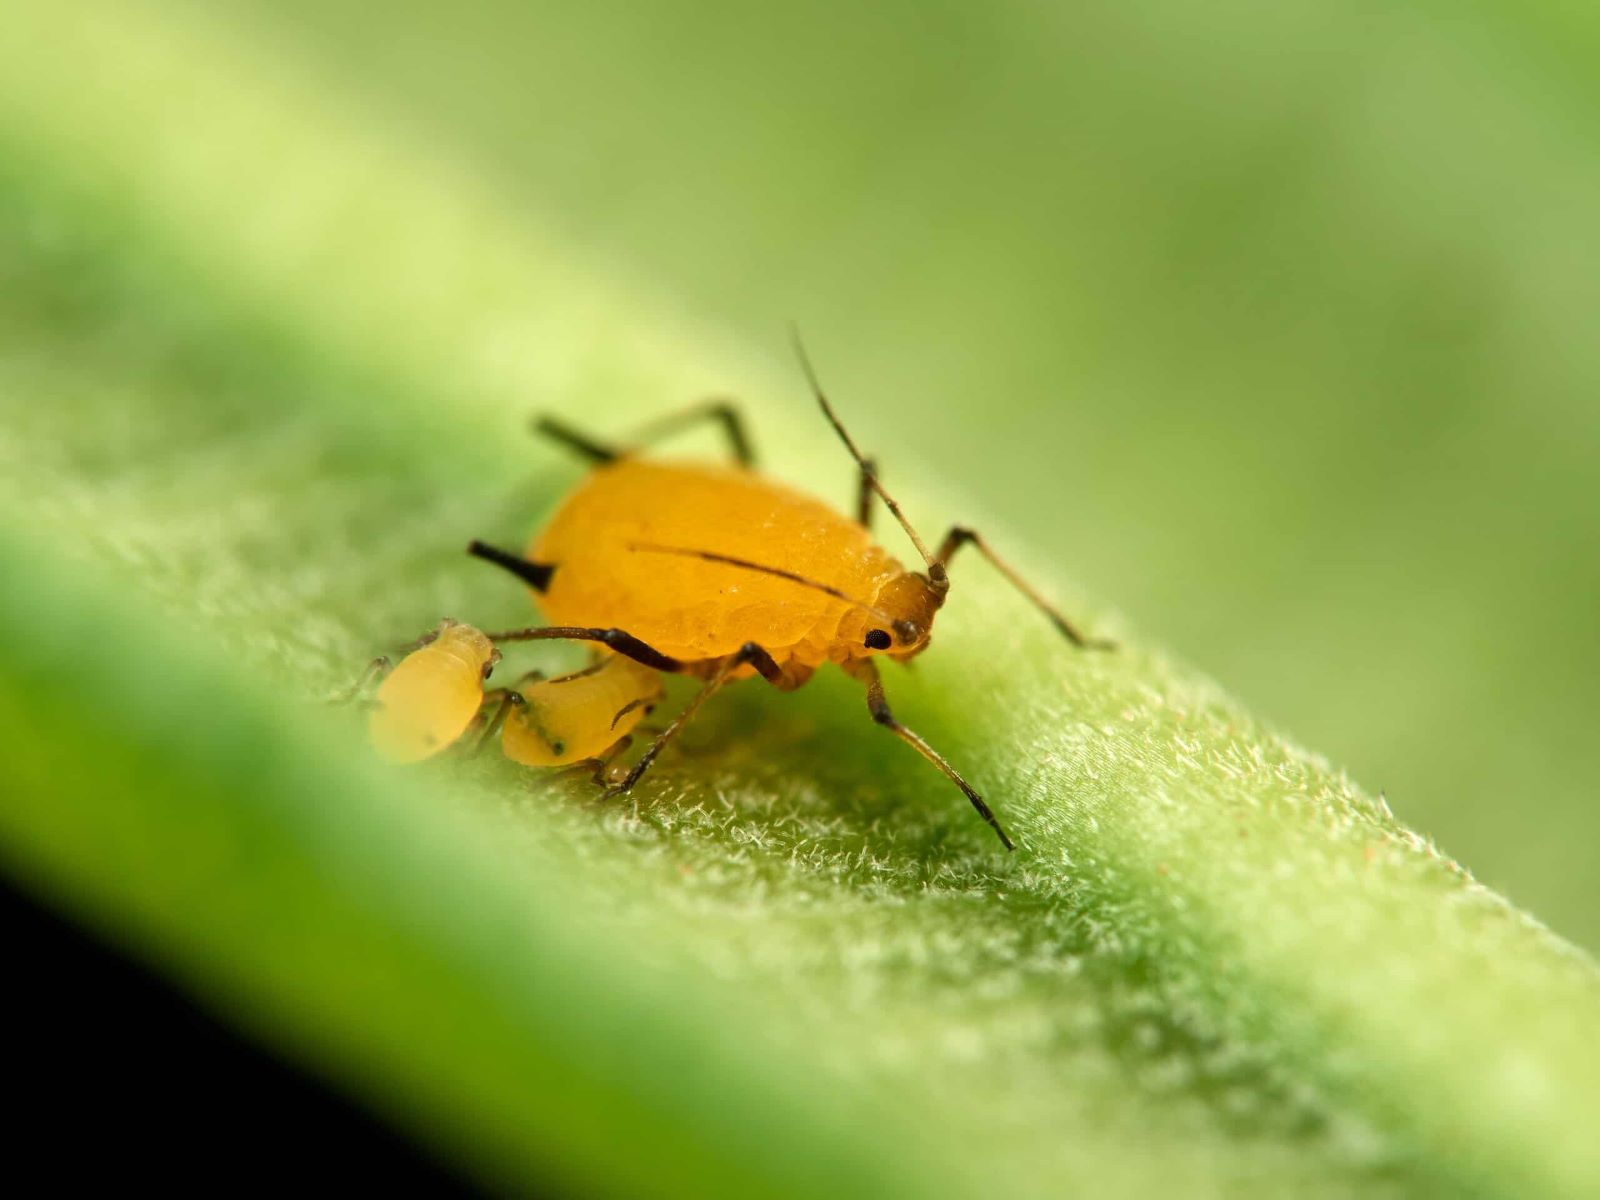 Say Goodbye To Those Pesky Little Yellow Bugs On Your Plants With These Creative Solutions!